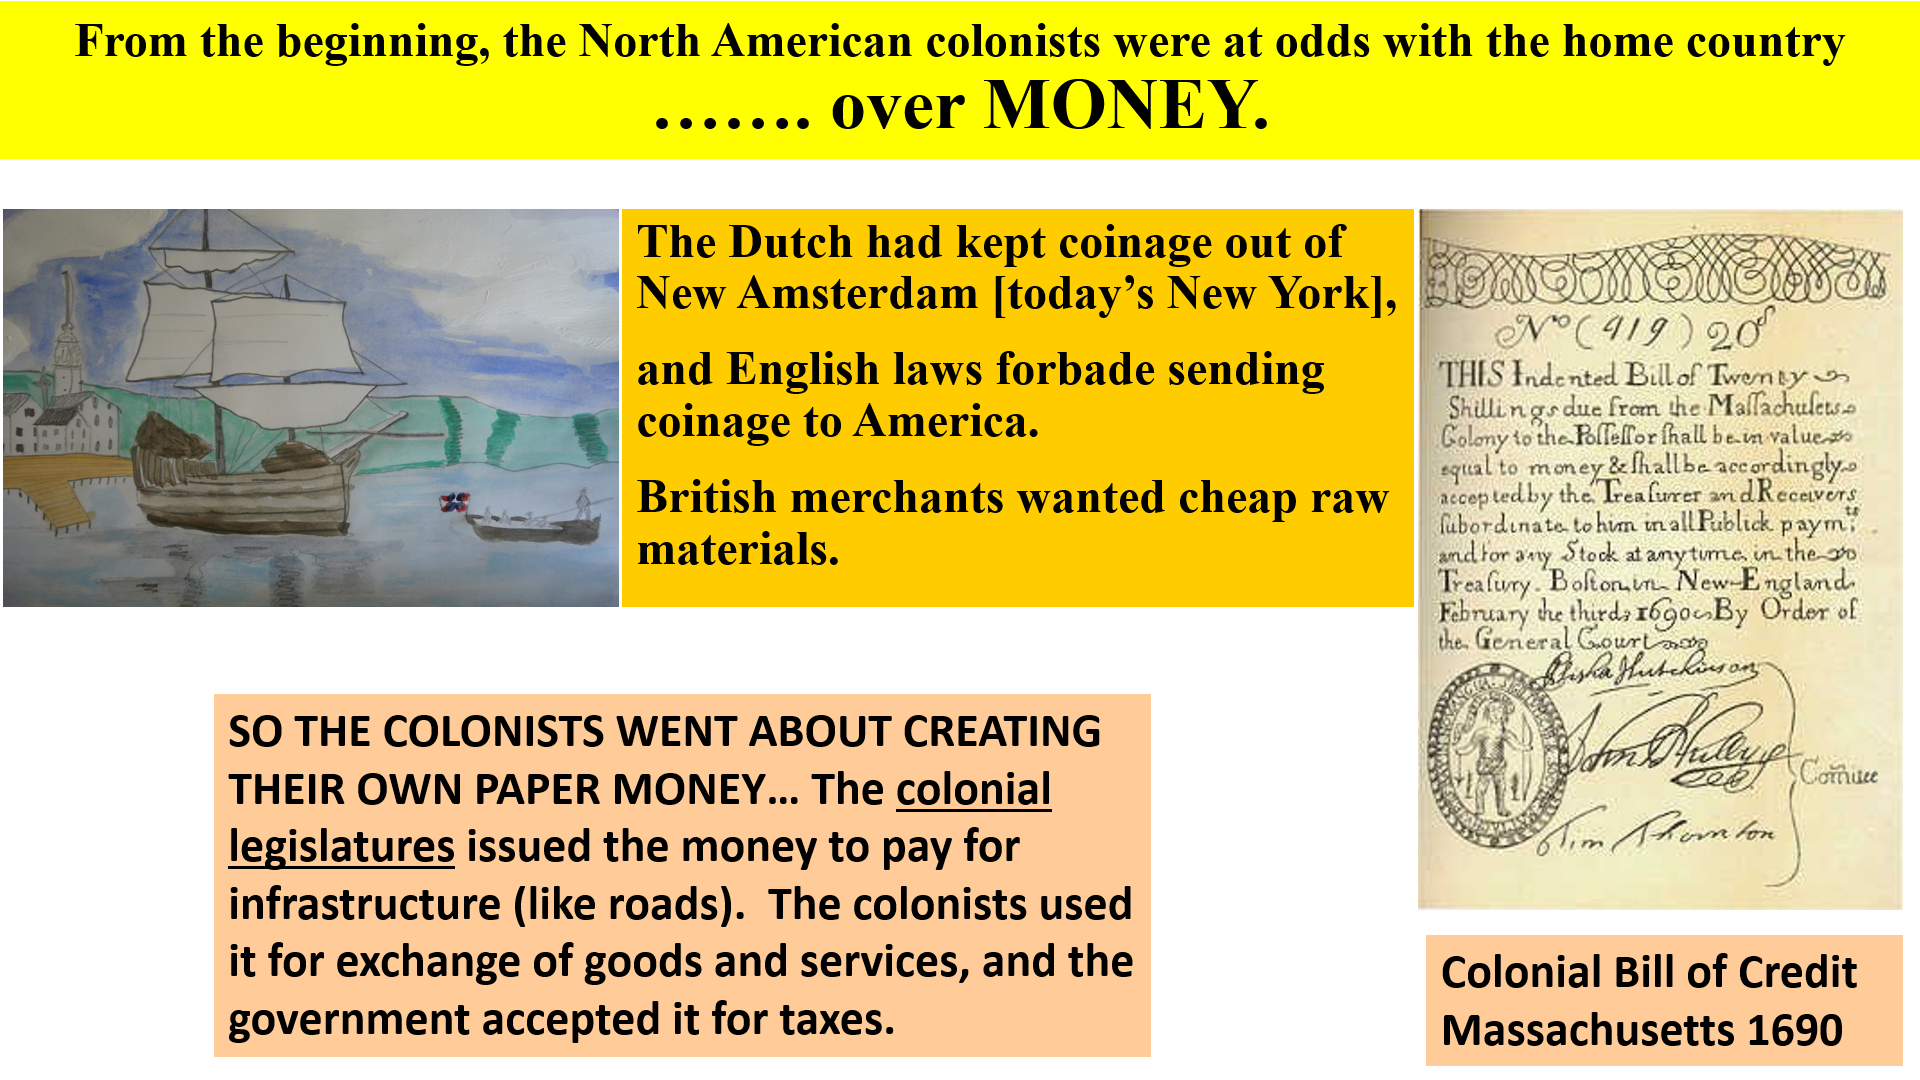 Part 2: Colonies struggle over money